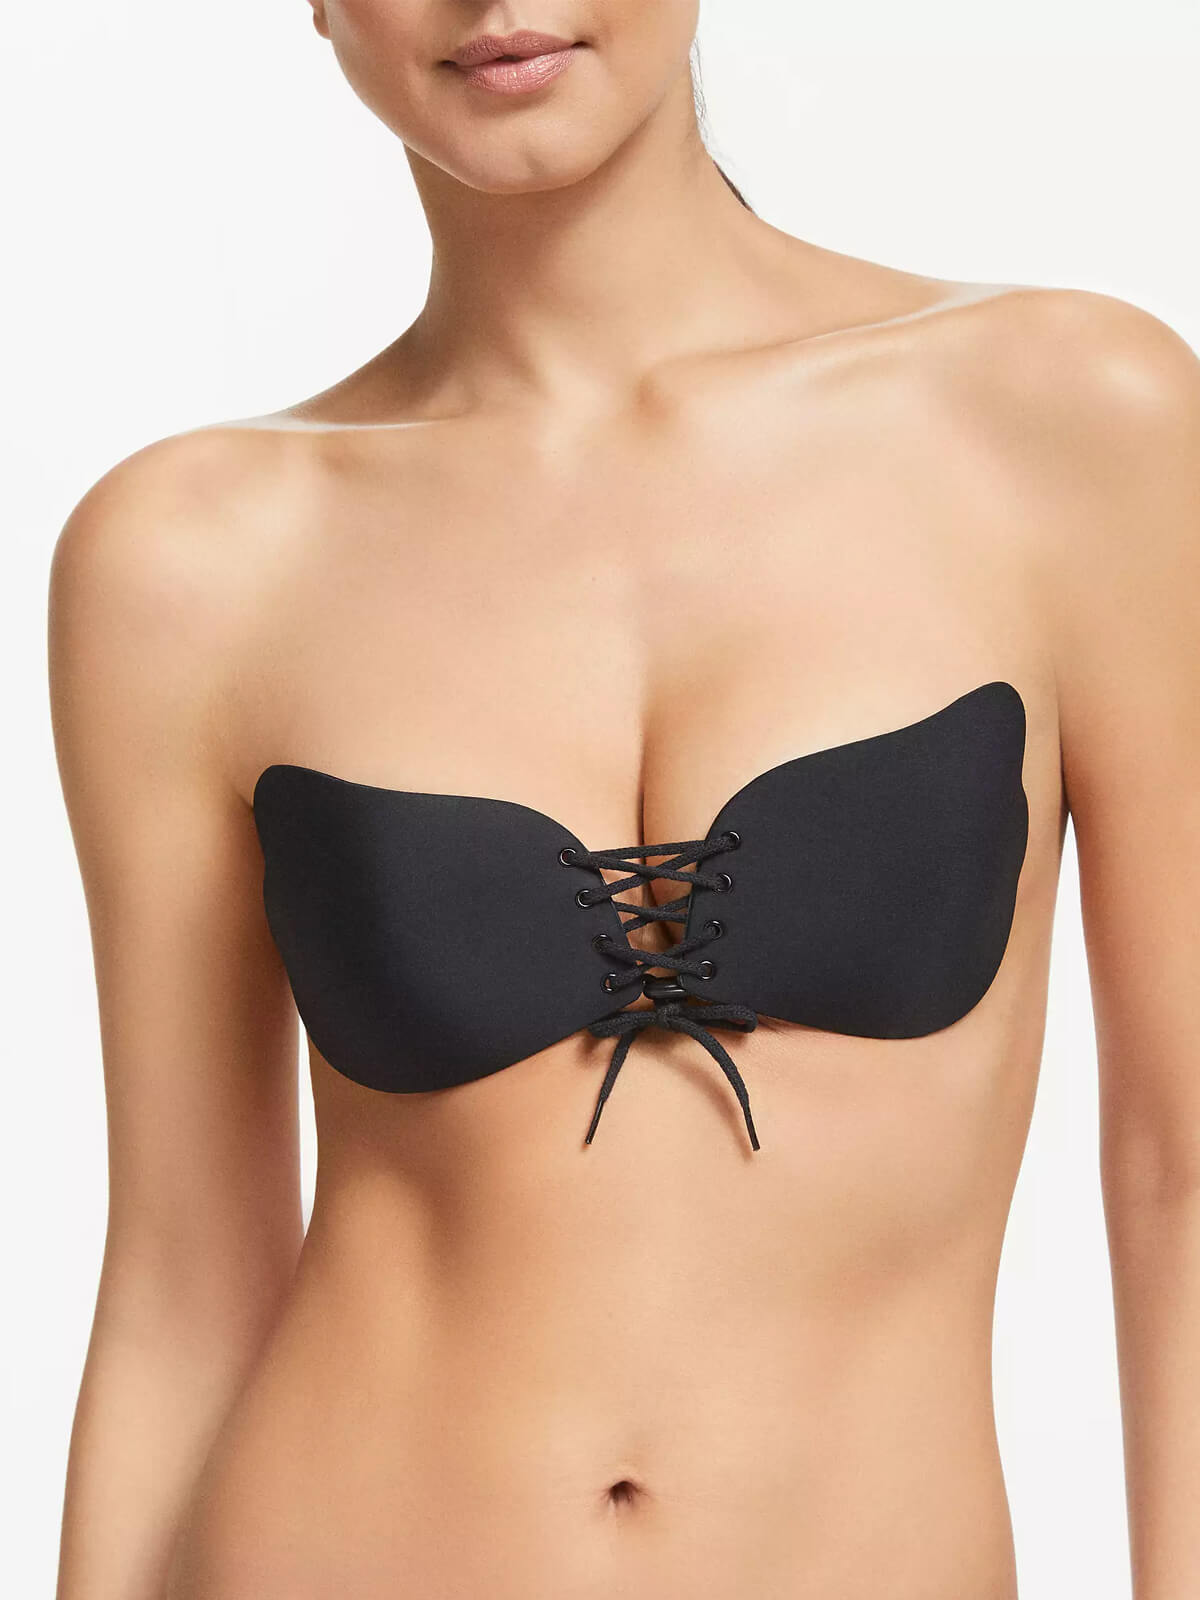 Midnightdivas - Invisible Push Up Bra <3 Most women find backless